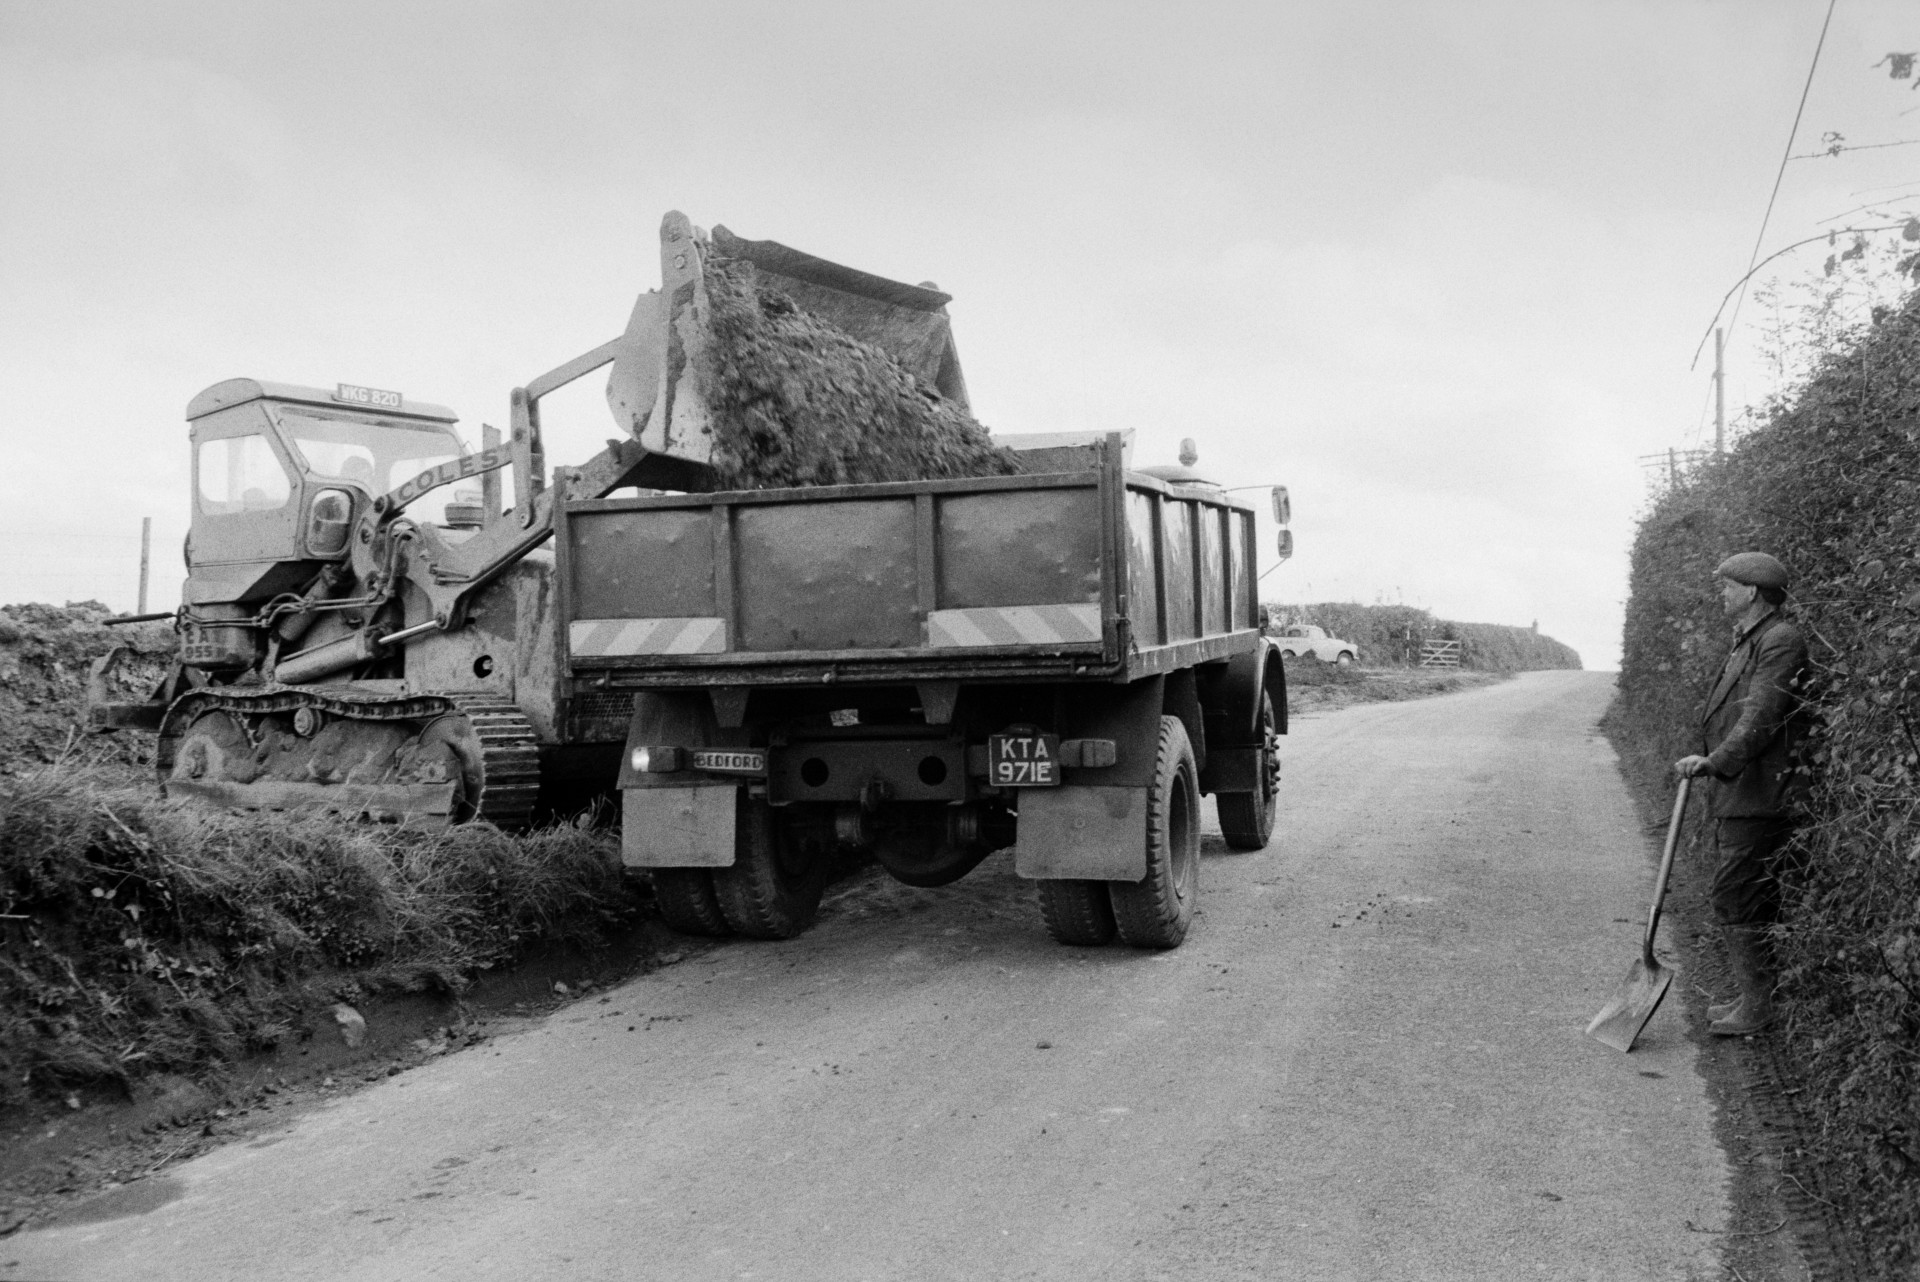 The widening of a road. A digger is loading earth into a waiting dumper truck. Lionel Bright is stood in the road holding a shovel and watching.